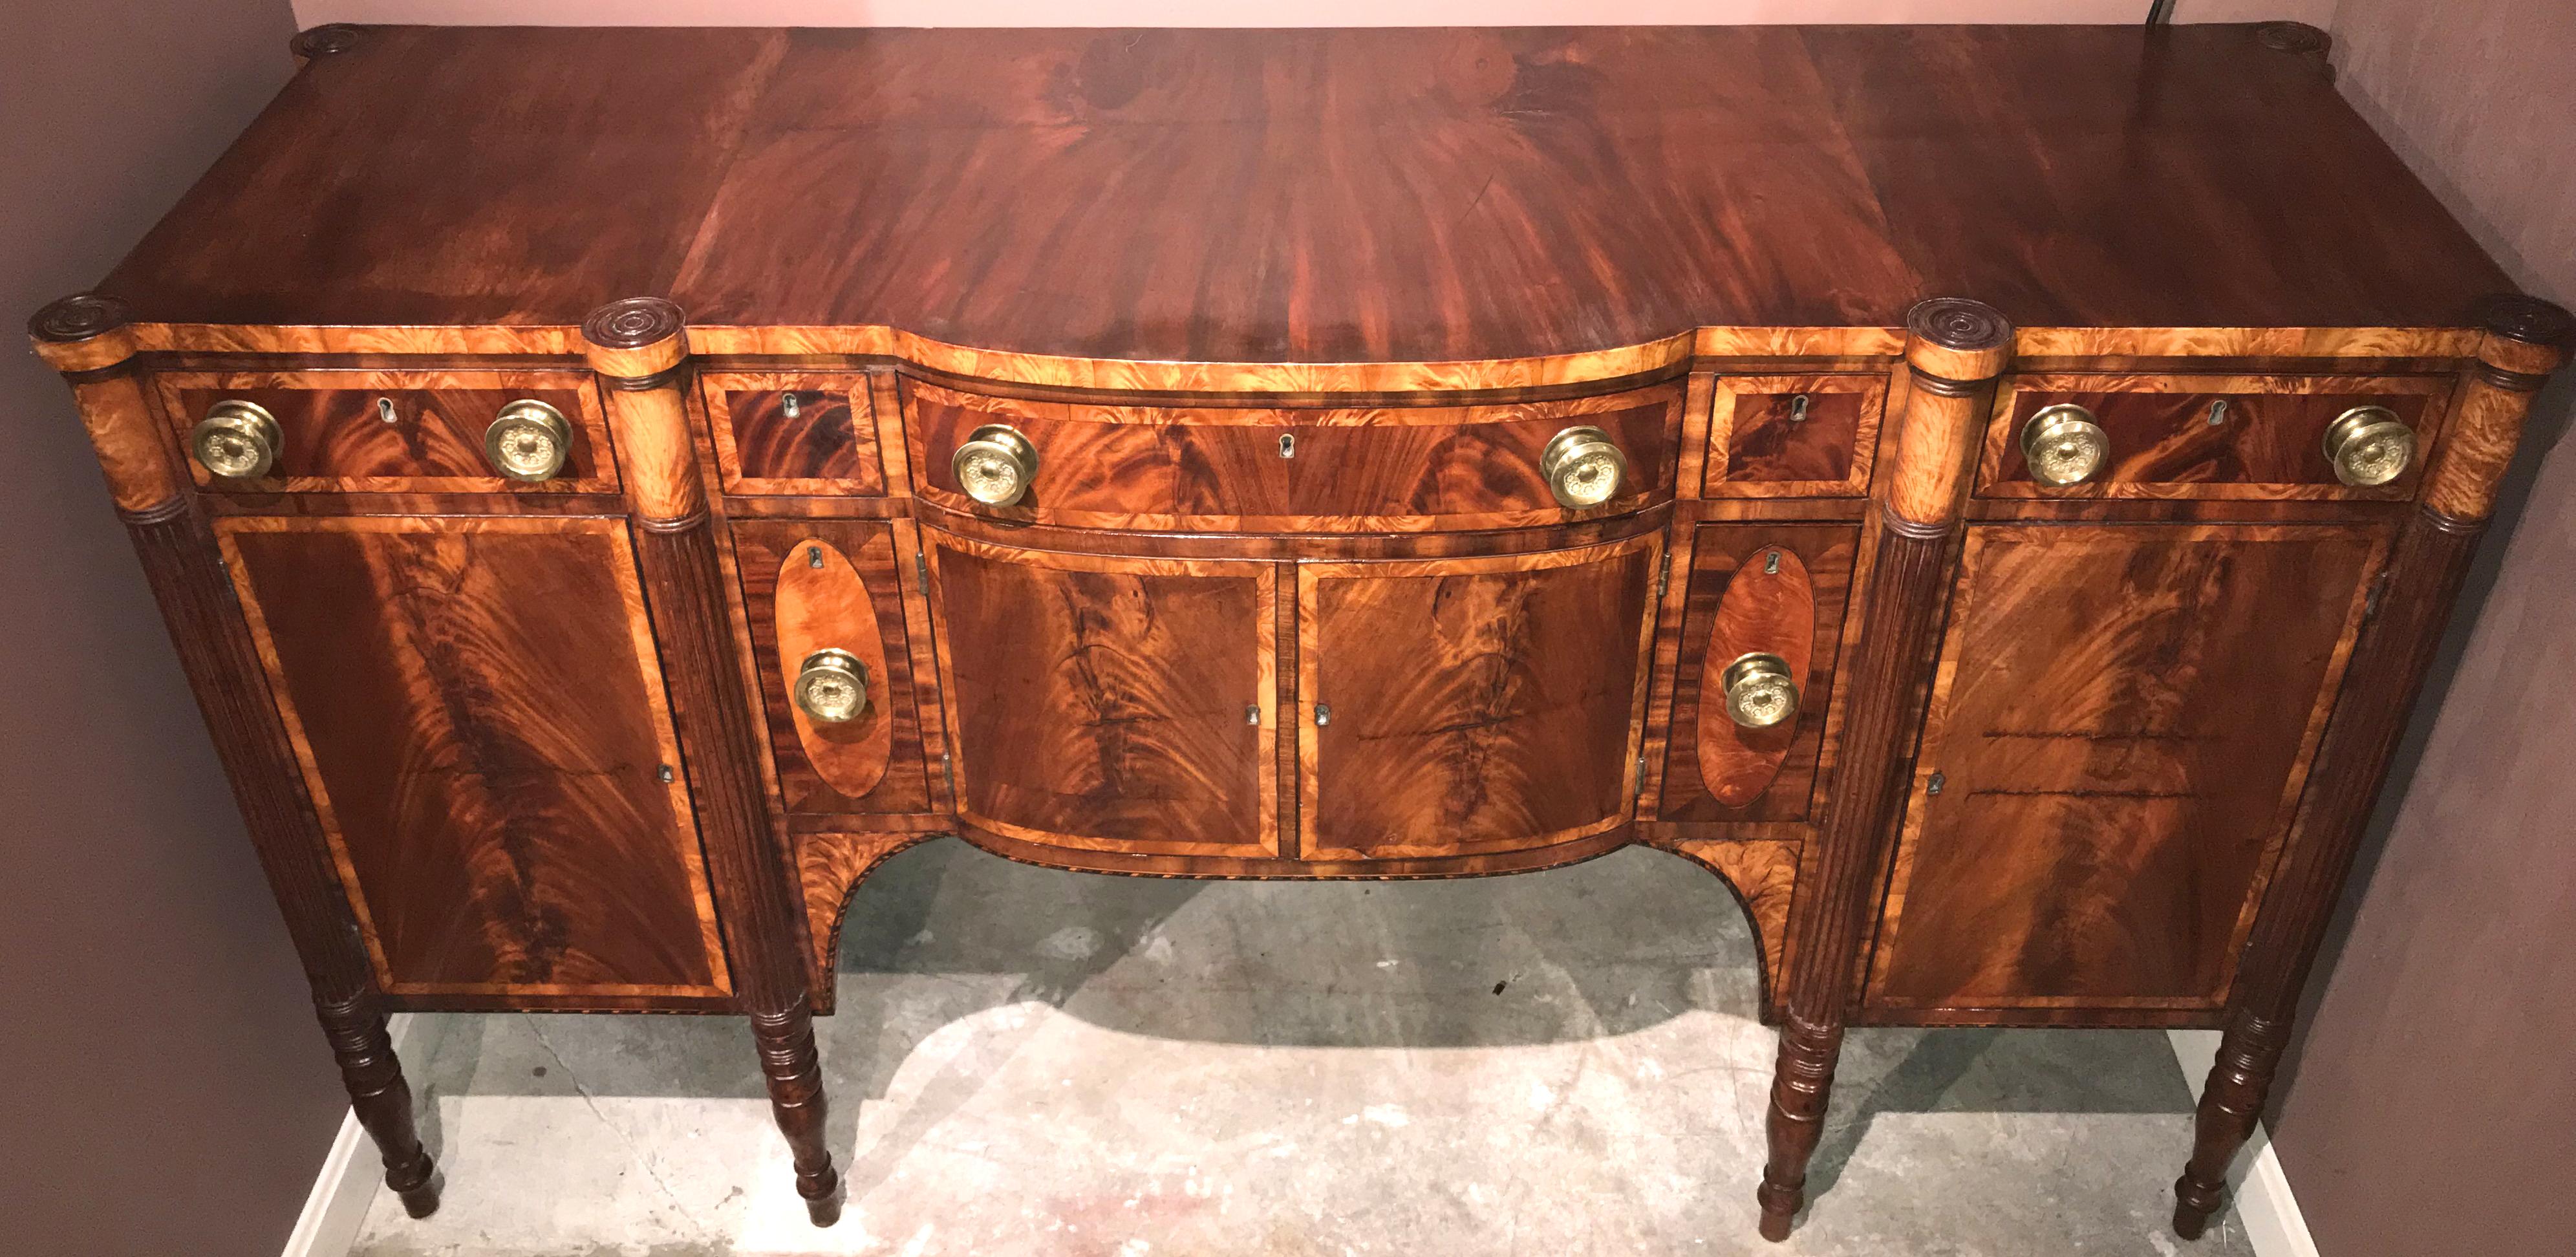 An exceptional Federal sideboard with bow front center section, conforming top surmounting an upper section with a center frieze drawer flanked by two fitted small drawers and two end drawers over two center doors, which open to interior storage,